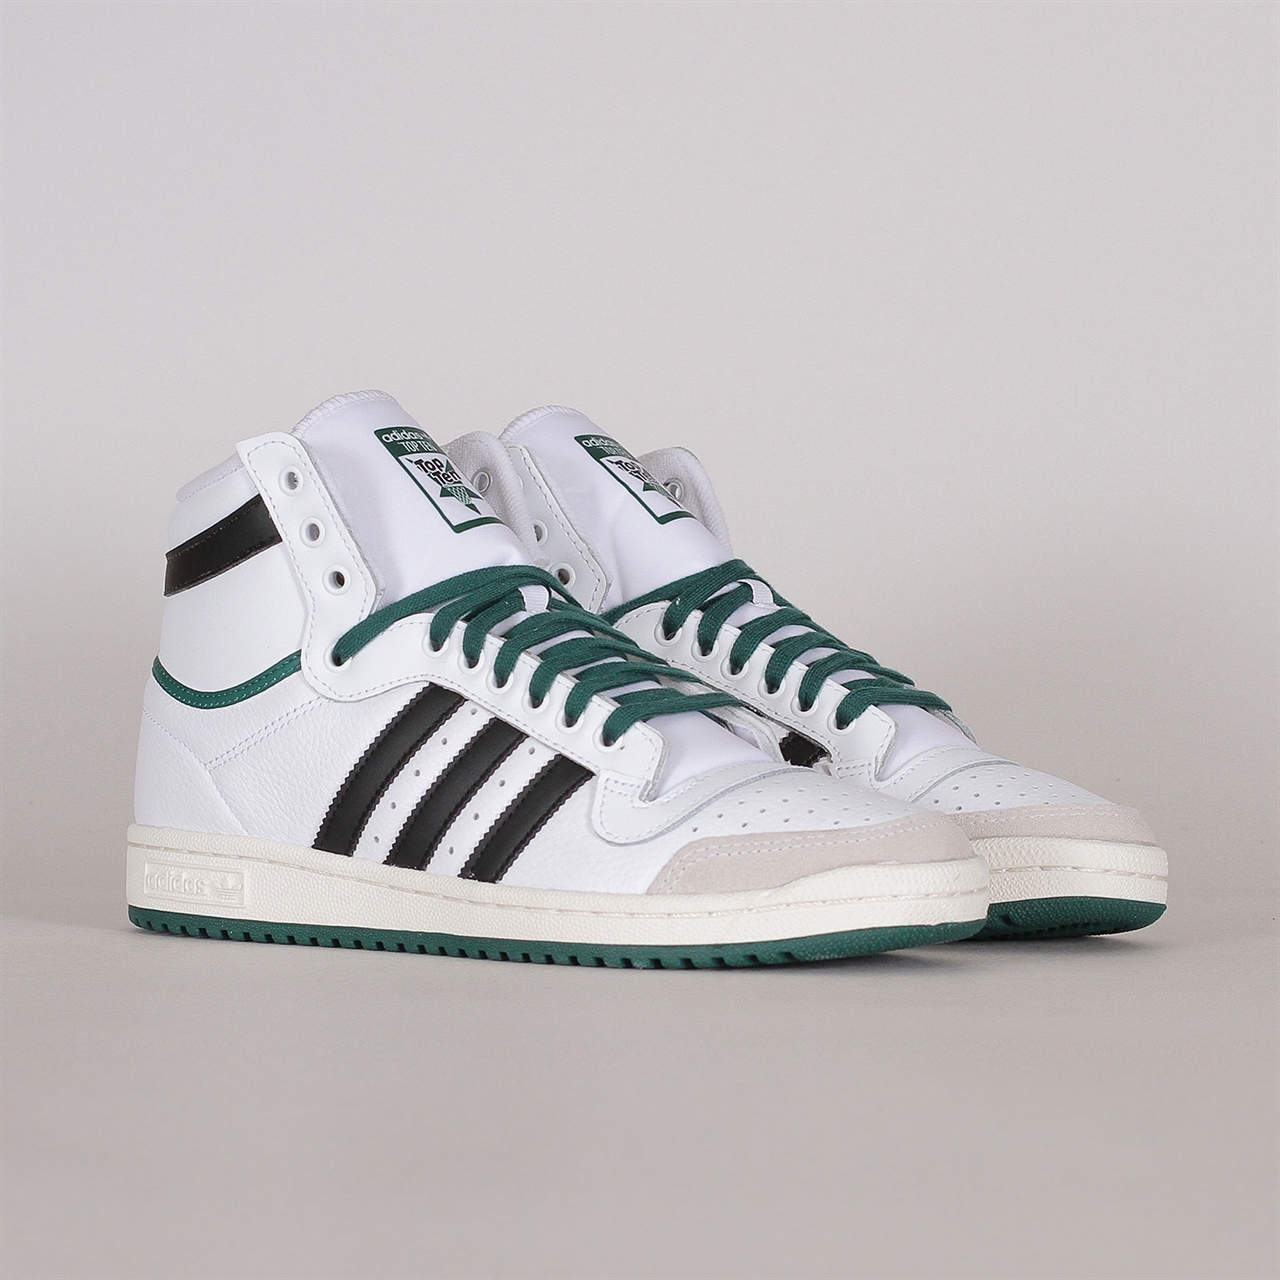 green and white adidas top tens